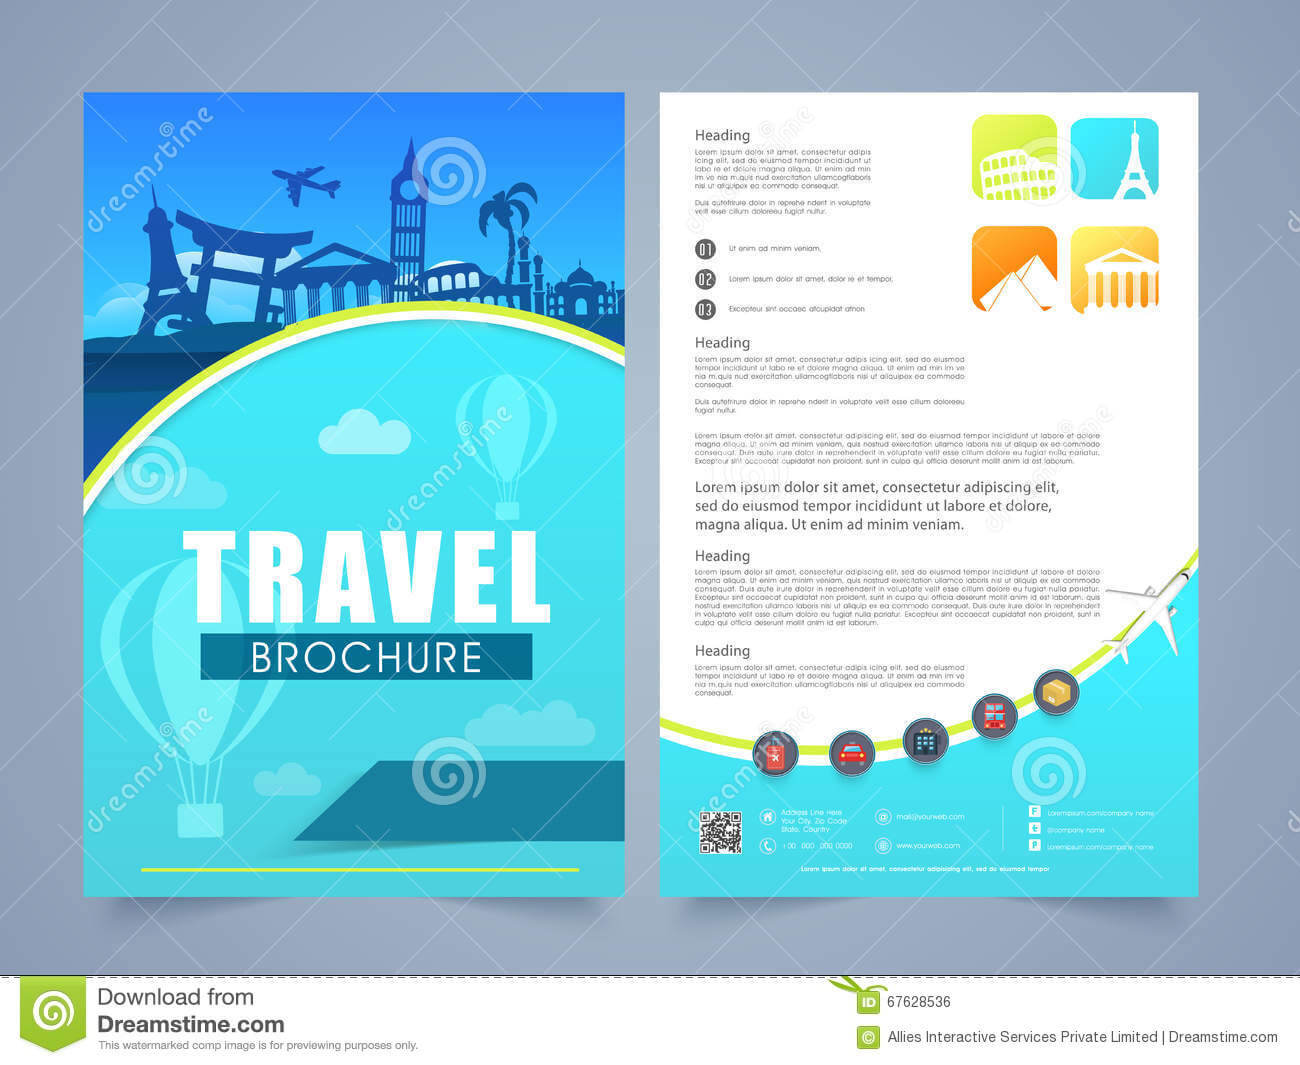 10 Example Of Travel Brochure | Business Letter Pertaining To Travel And Tourism Brochure Templates Free